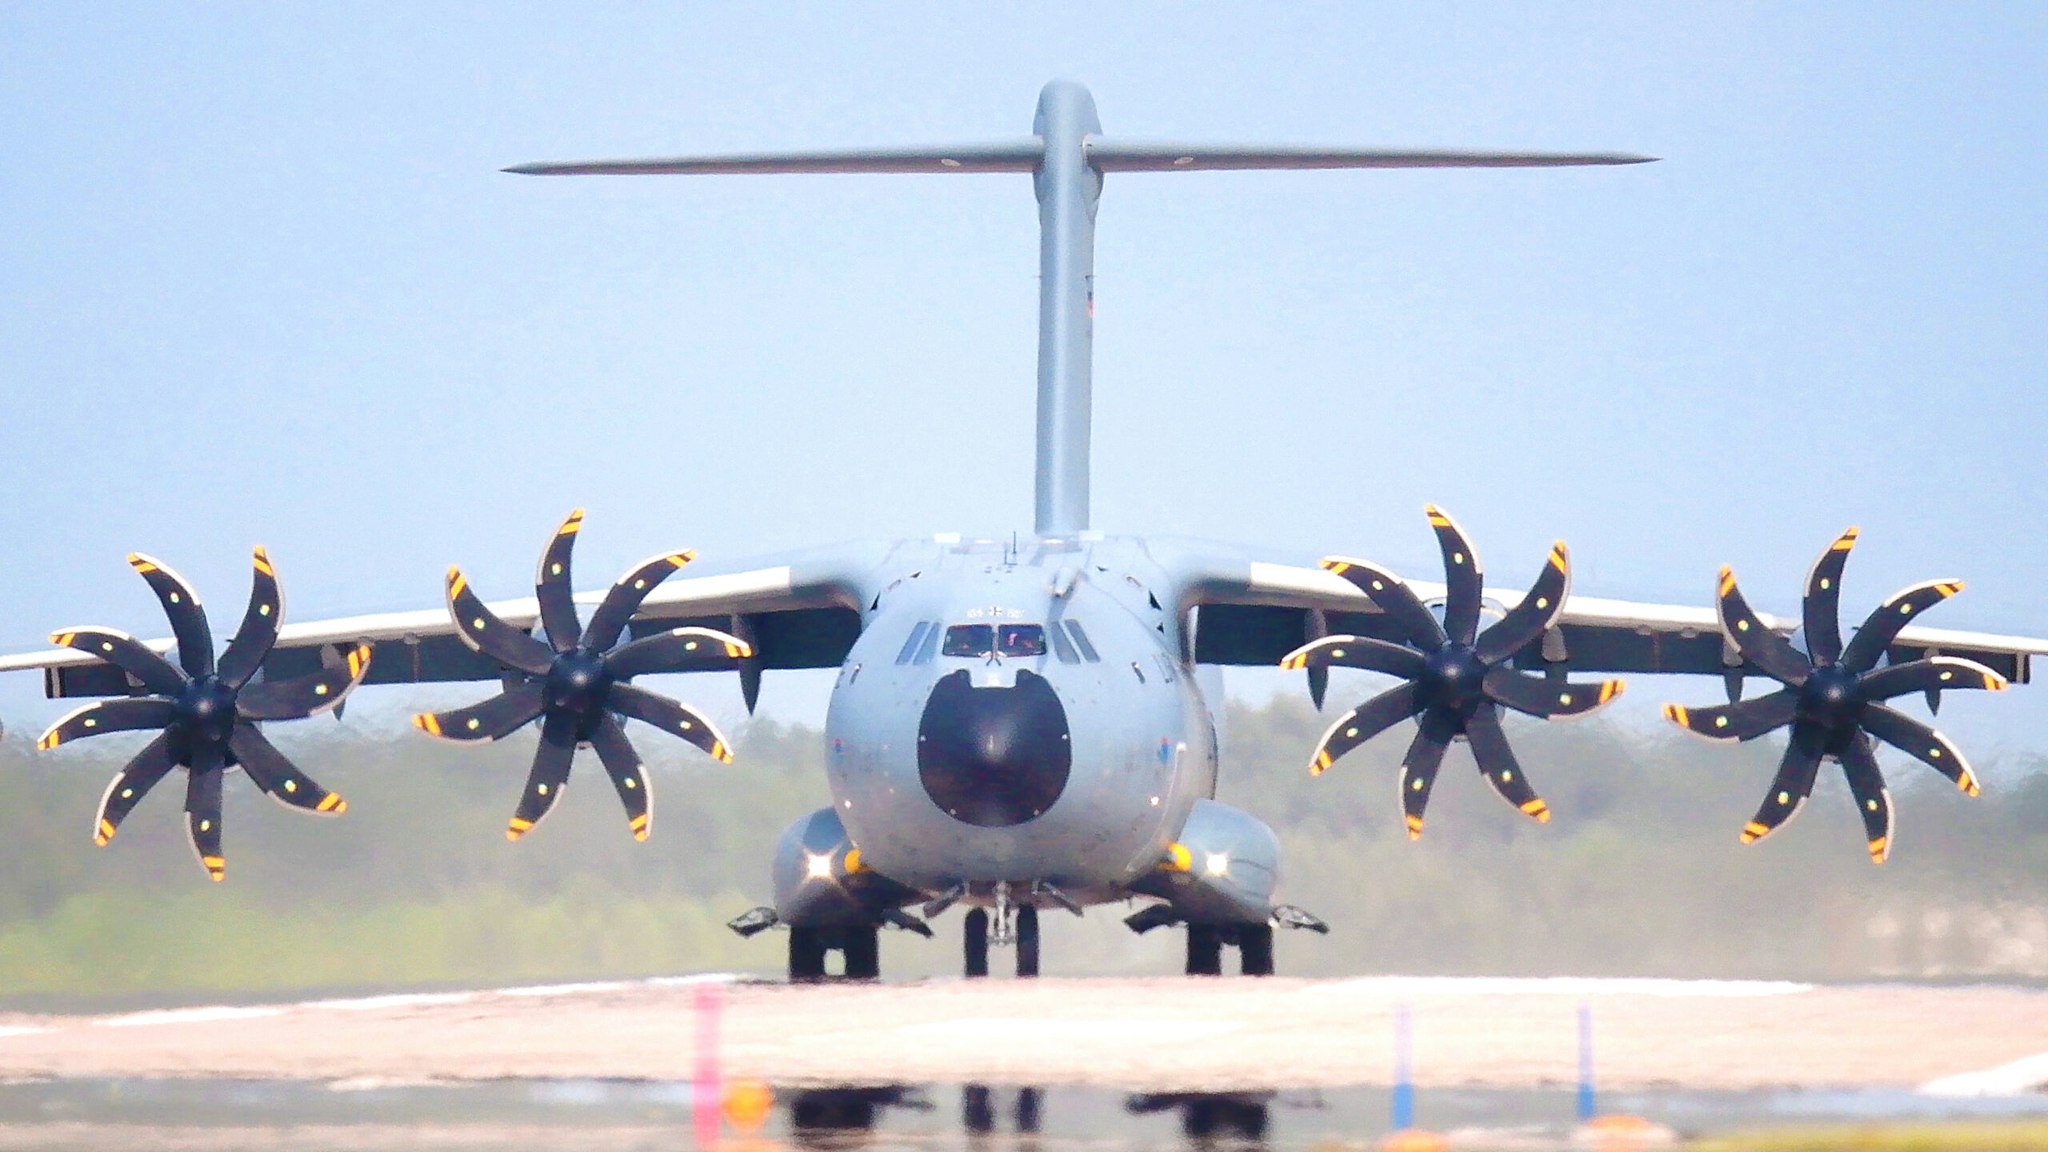 15 August 2021, Lower Saxony, Wunstorf: An Airbus A400M transport aircraft of the German Air Force taxis across the runway at Wunstorf Air Base in the Hanover region. In view of the rapid advance of the Taliban in Afghanistan, the Bundeswehr wants to quickly begin evacuating German citizens and local Afghan forces from Kabul.